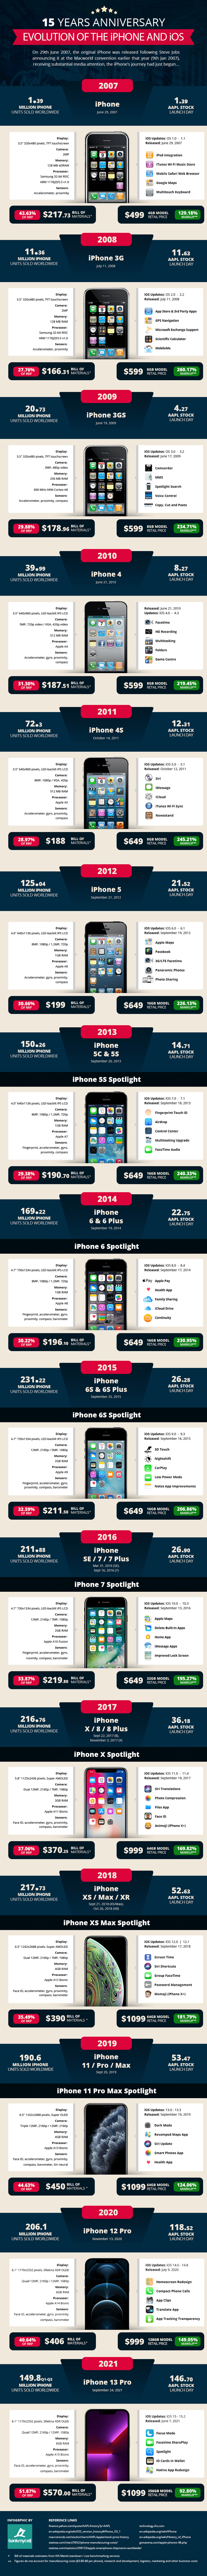 Infographic: Evolution of the iPhone and iOS